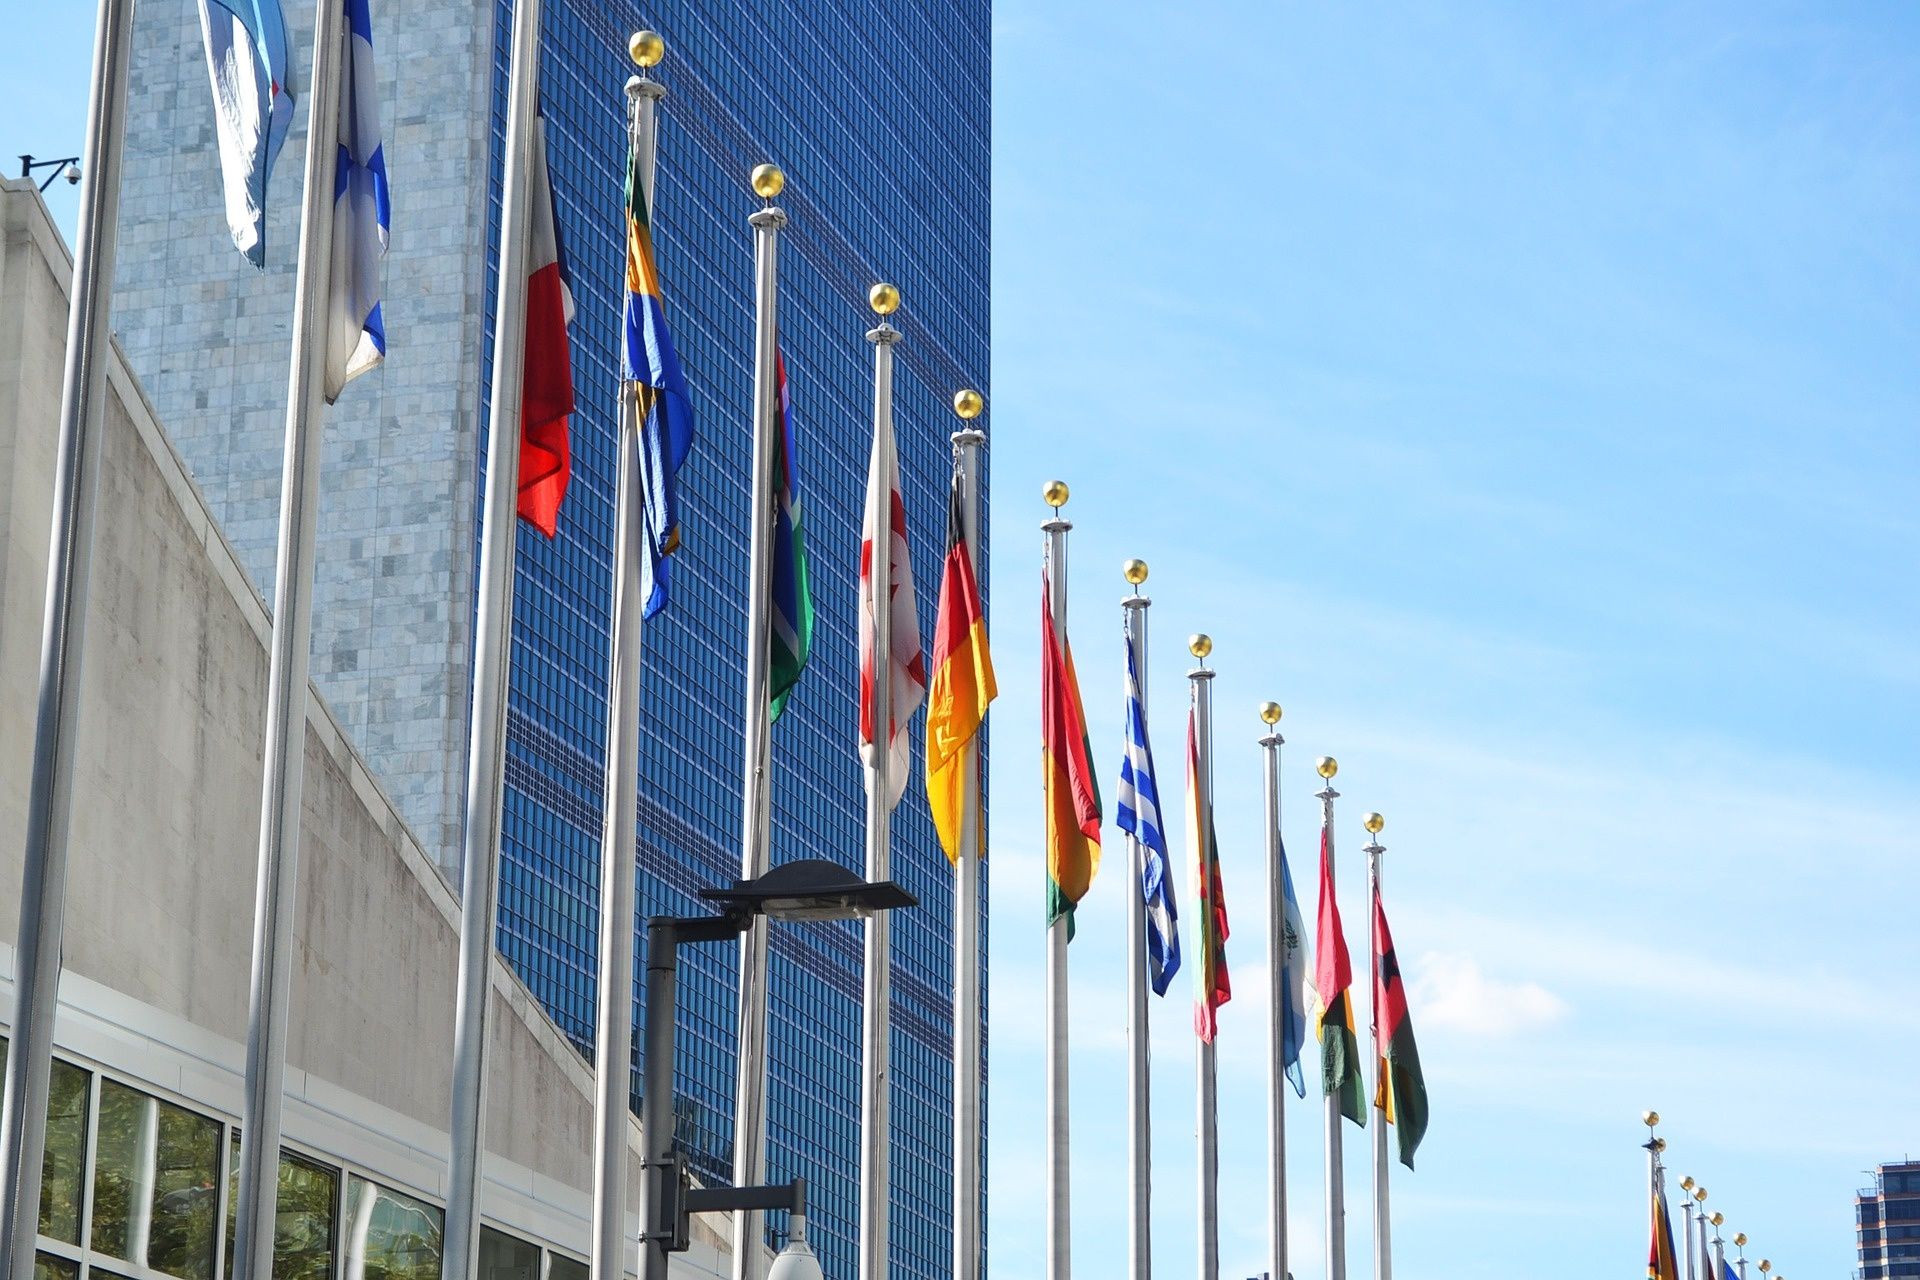 Flags outside the United Nations headquarters in New York City.